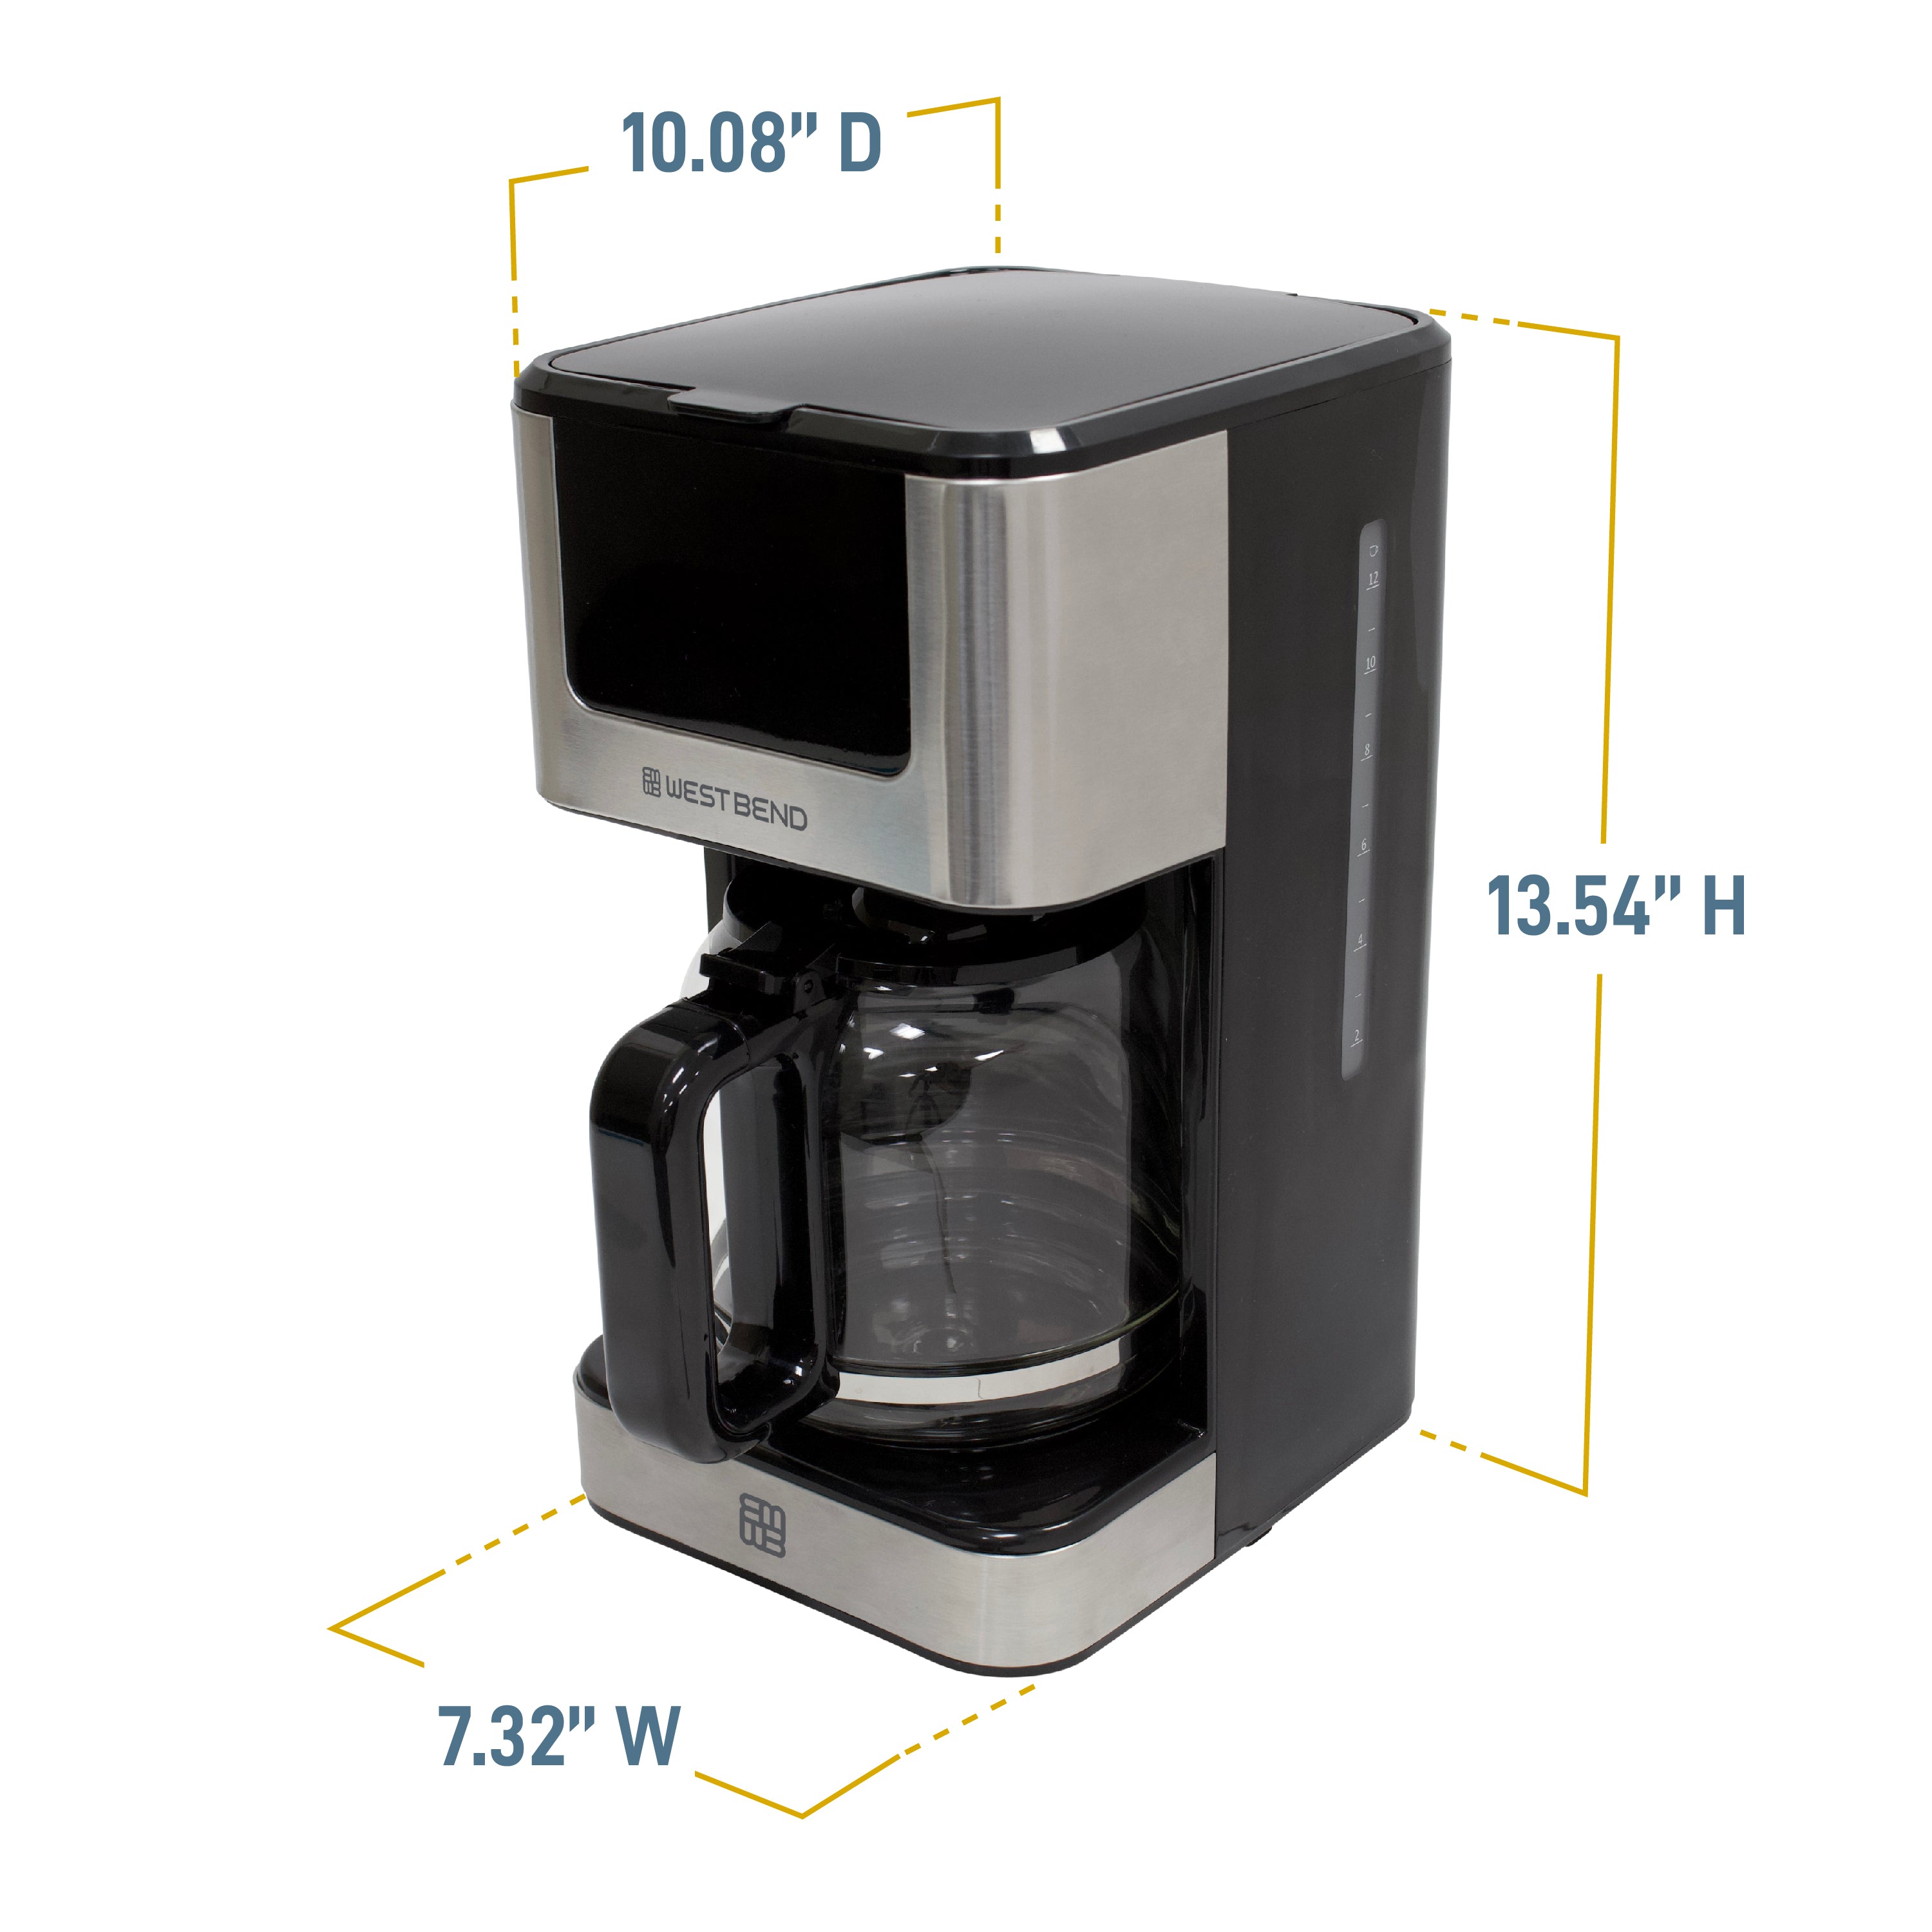 West Bend Coffee Maker, 36 cup, 18 H